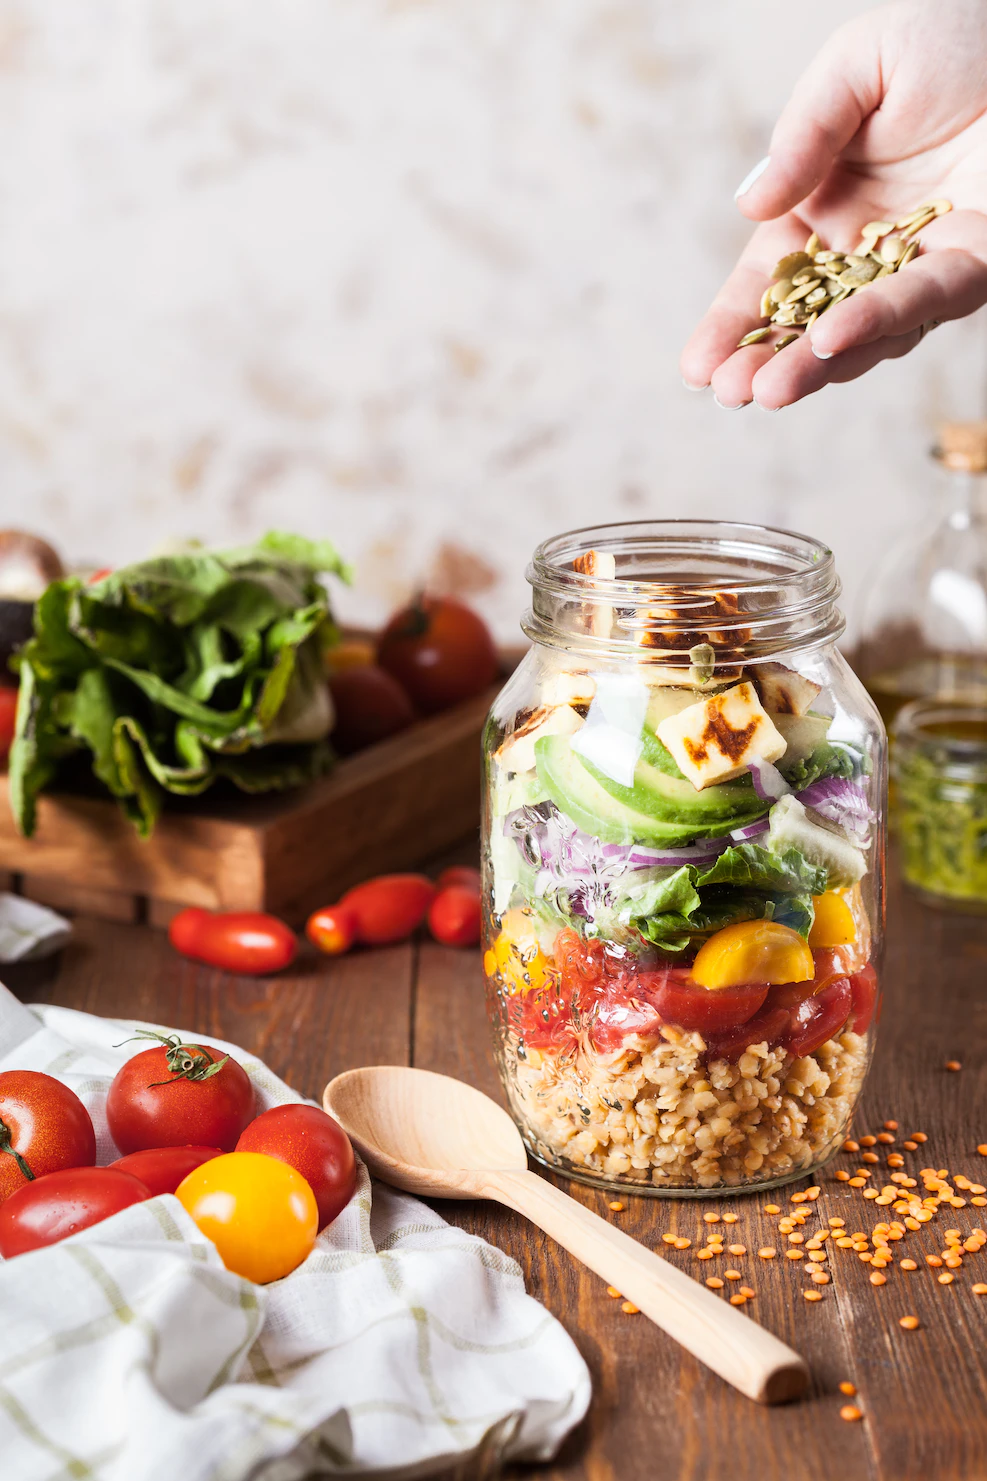 How to Select Eco-Friendly Food Storage Containers